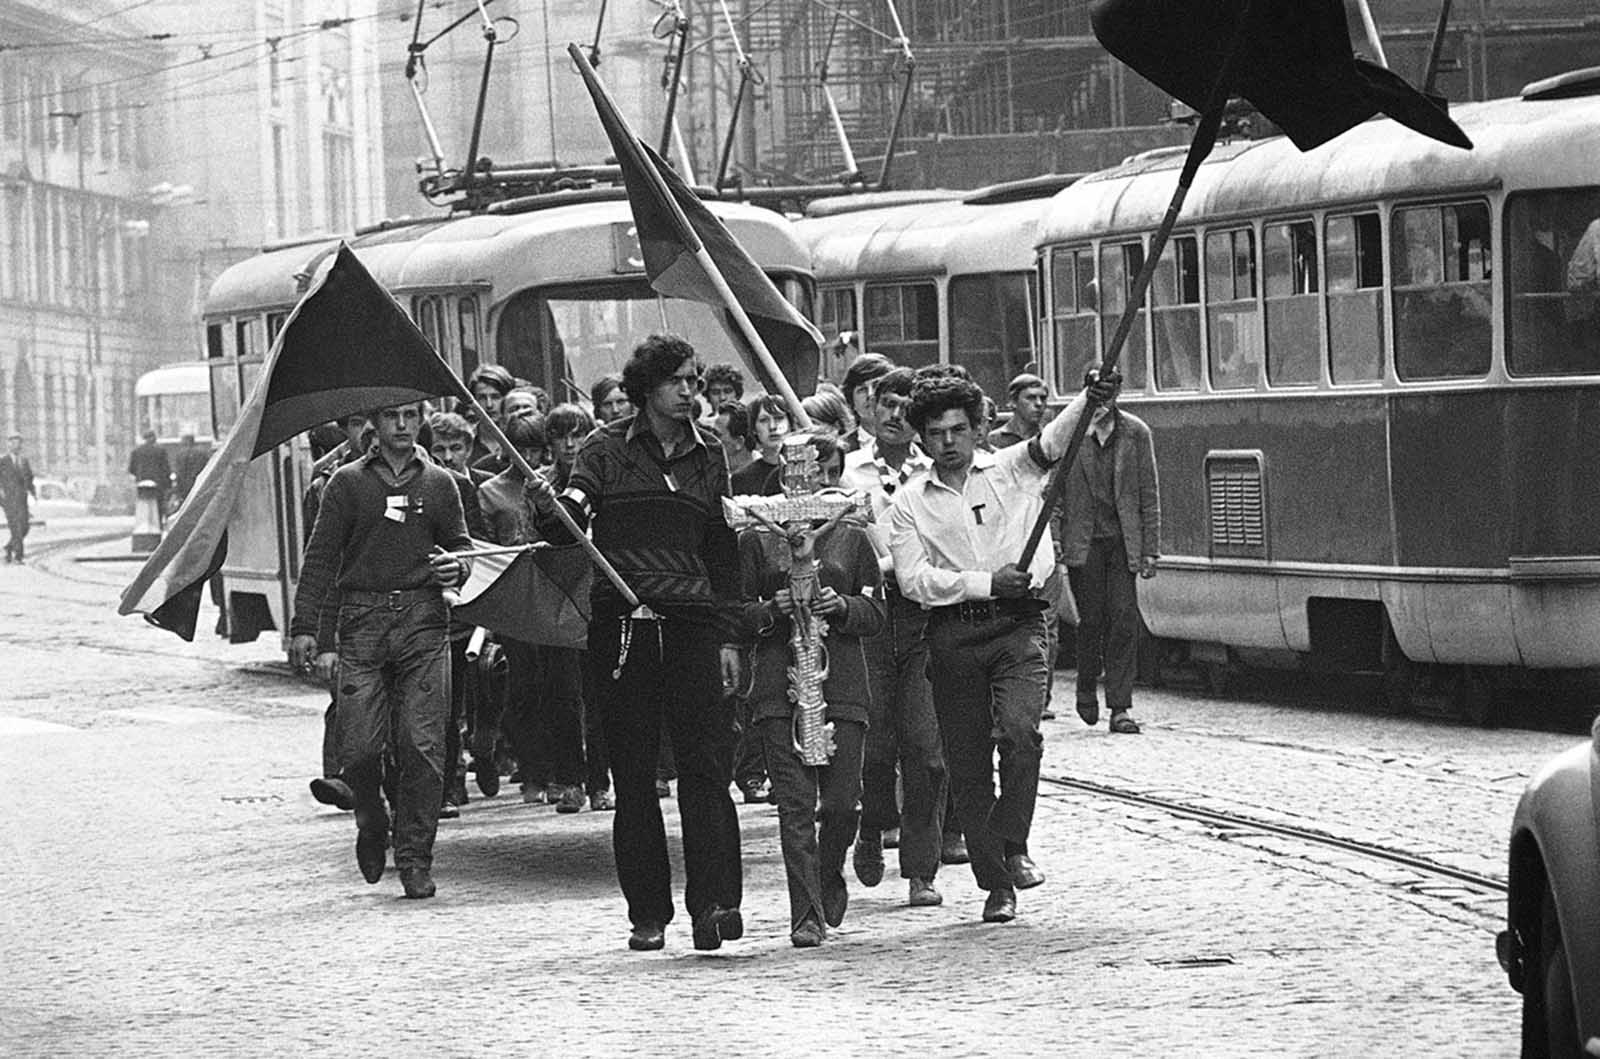 Youths carry a crucifix on their way to the burial of a friend shot by the Soviets on August 27, 1968, in Prague.